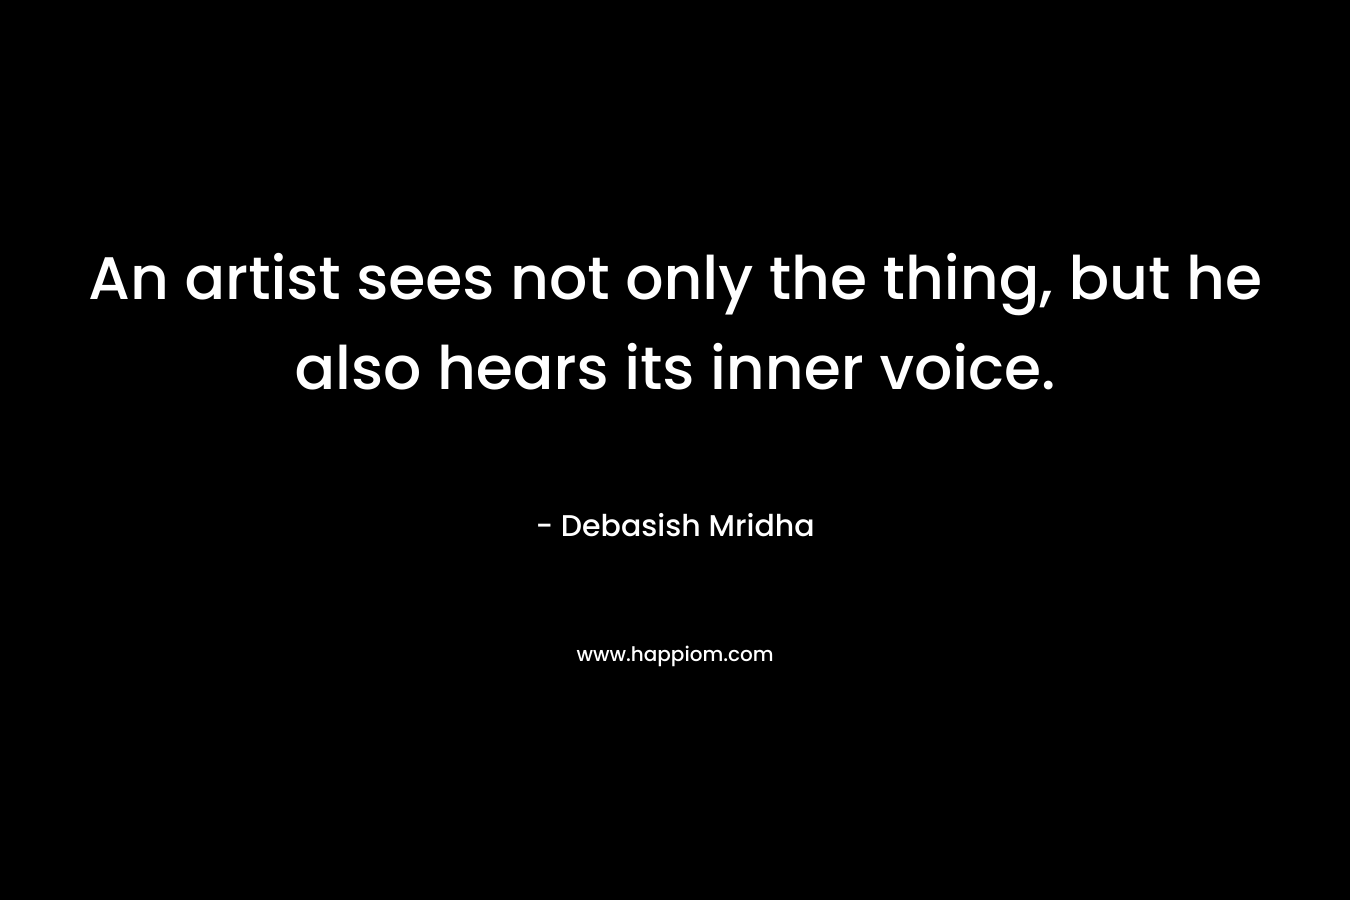 An artist sees not only the thing, but he also hears its inner voice.